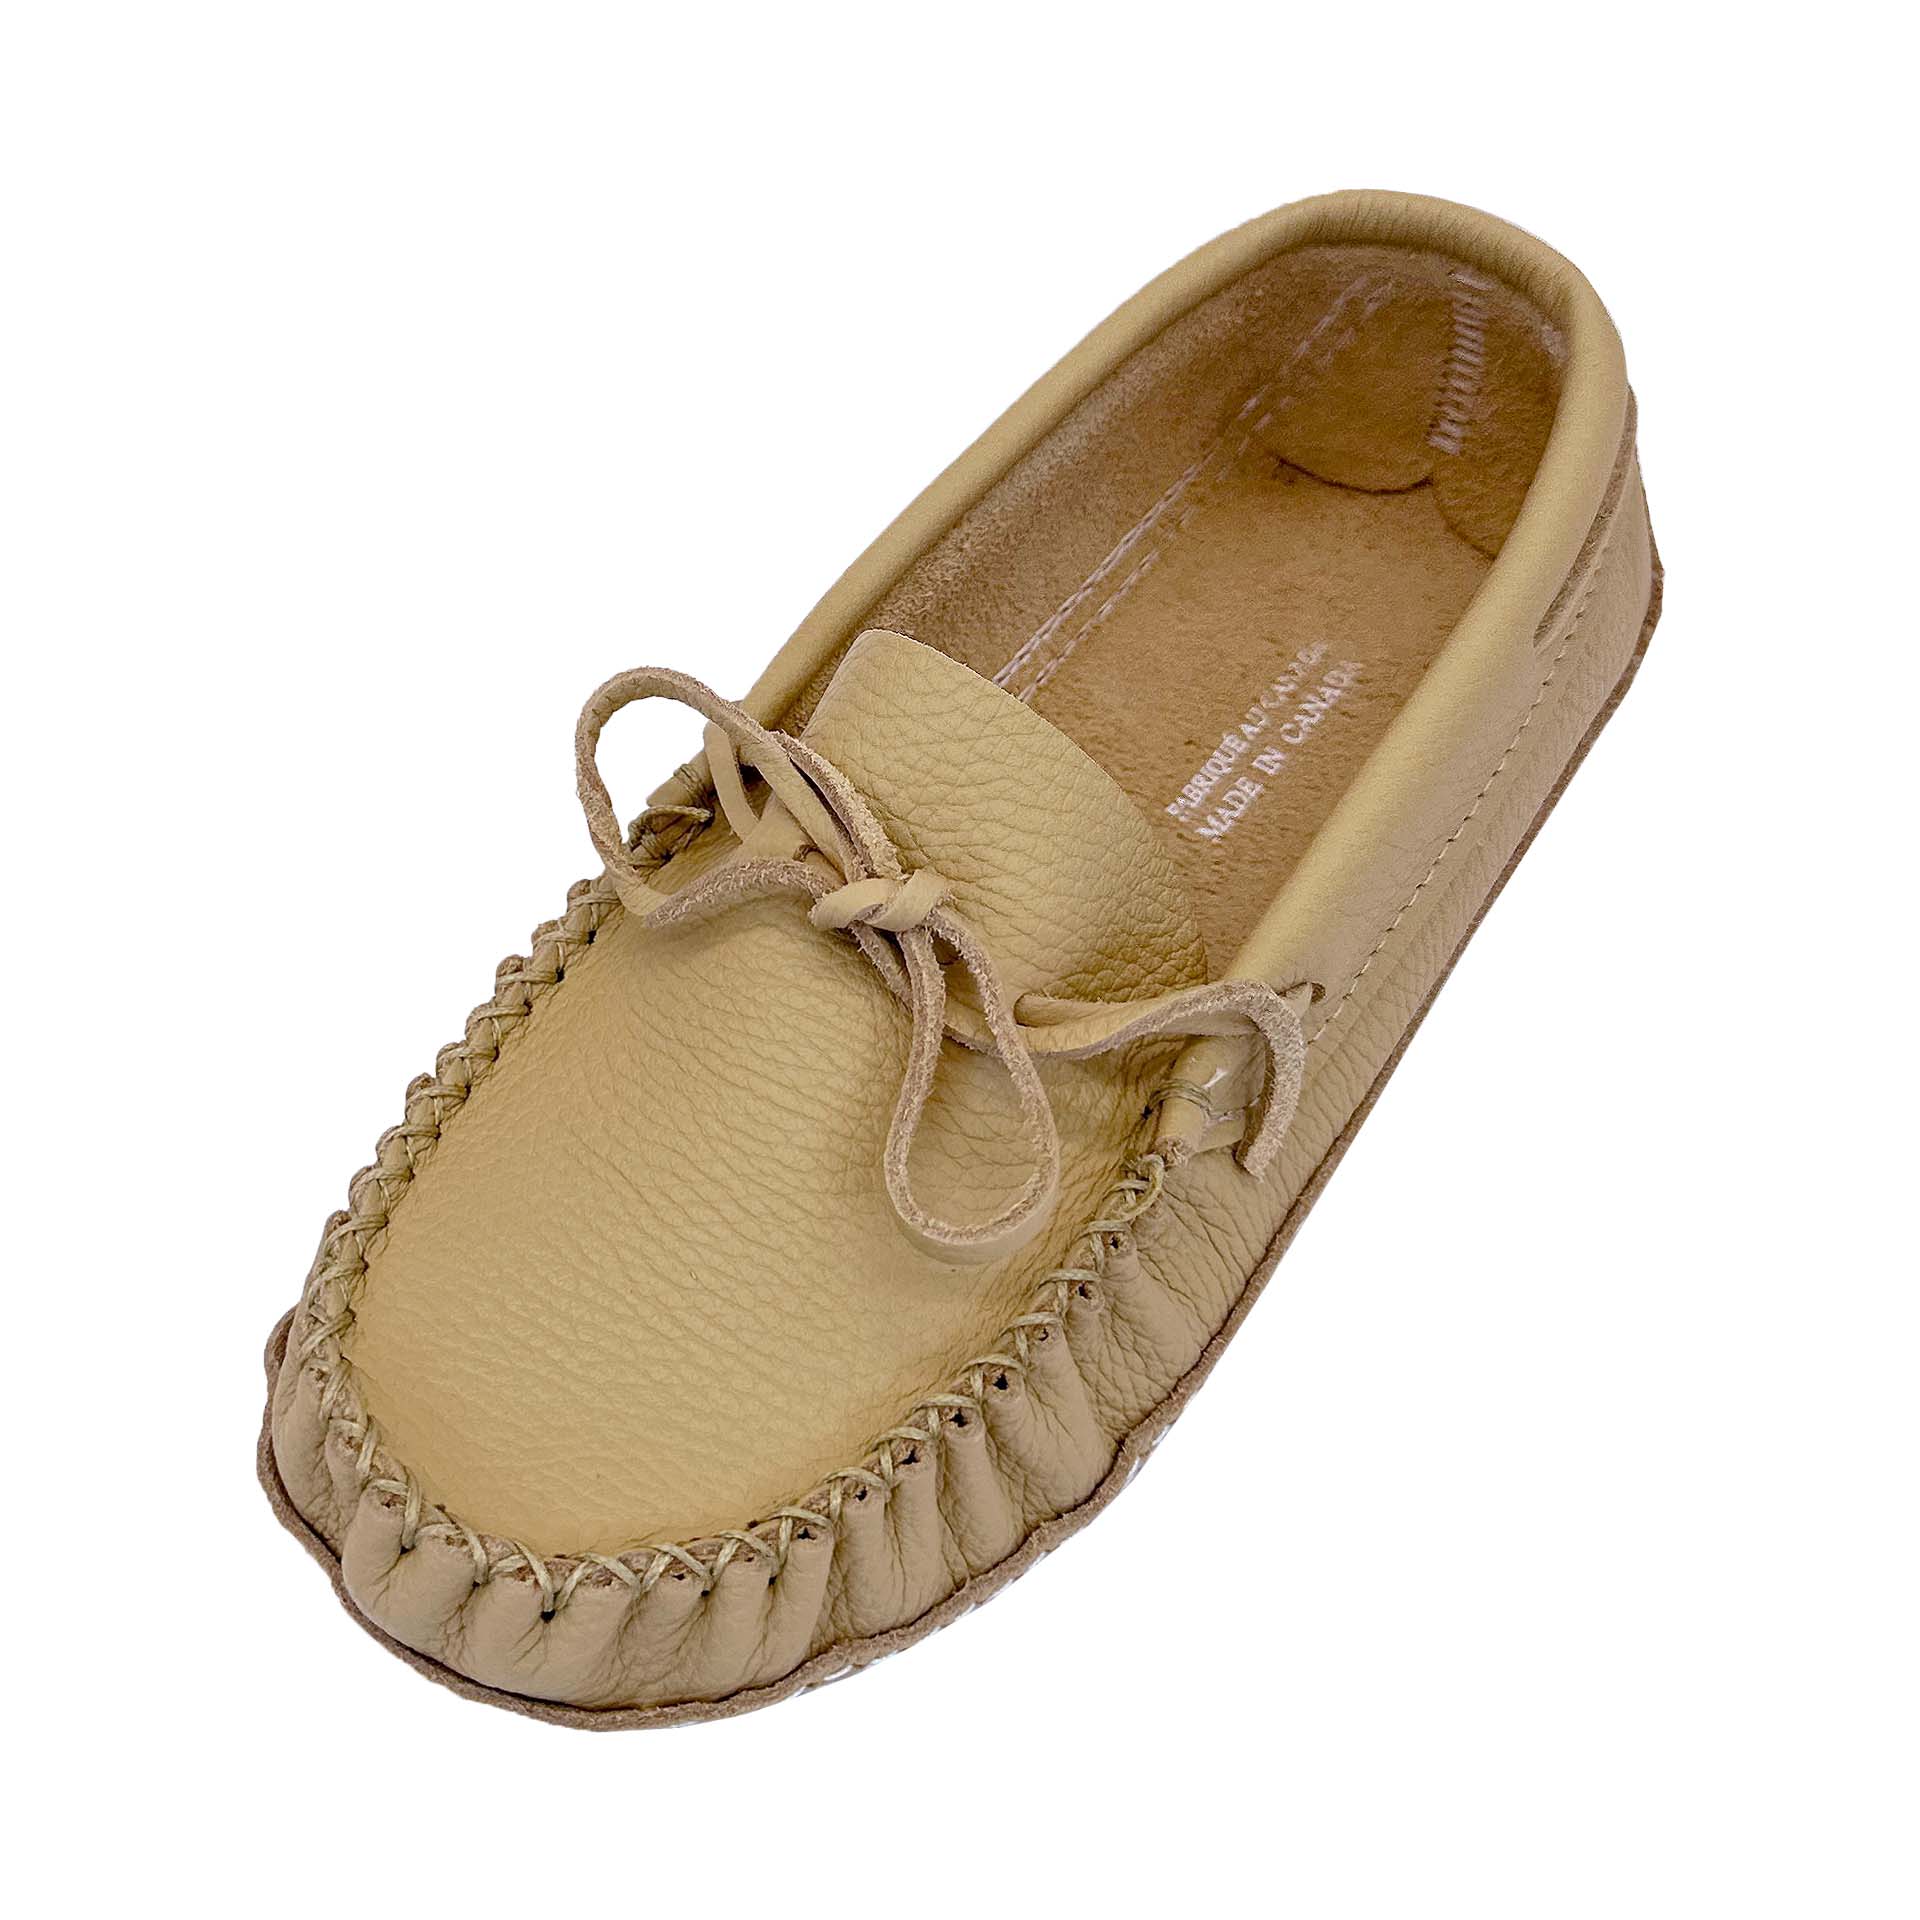 Men's Wide Cream Leather Moccasins (Final Clearance)